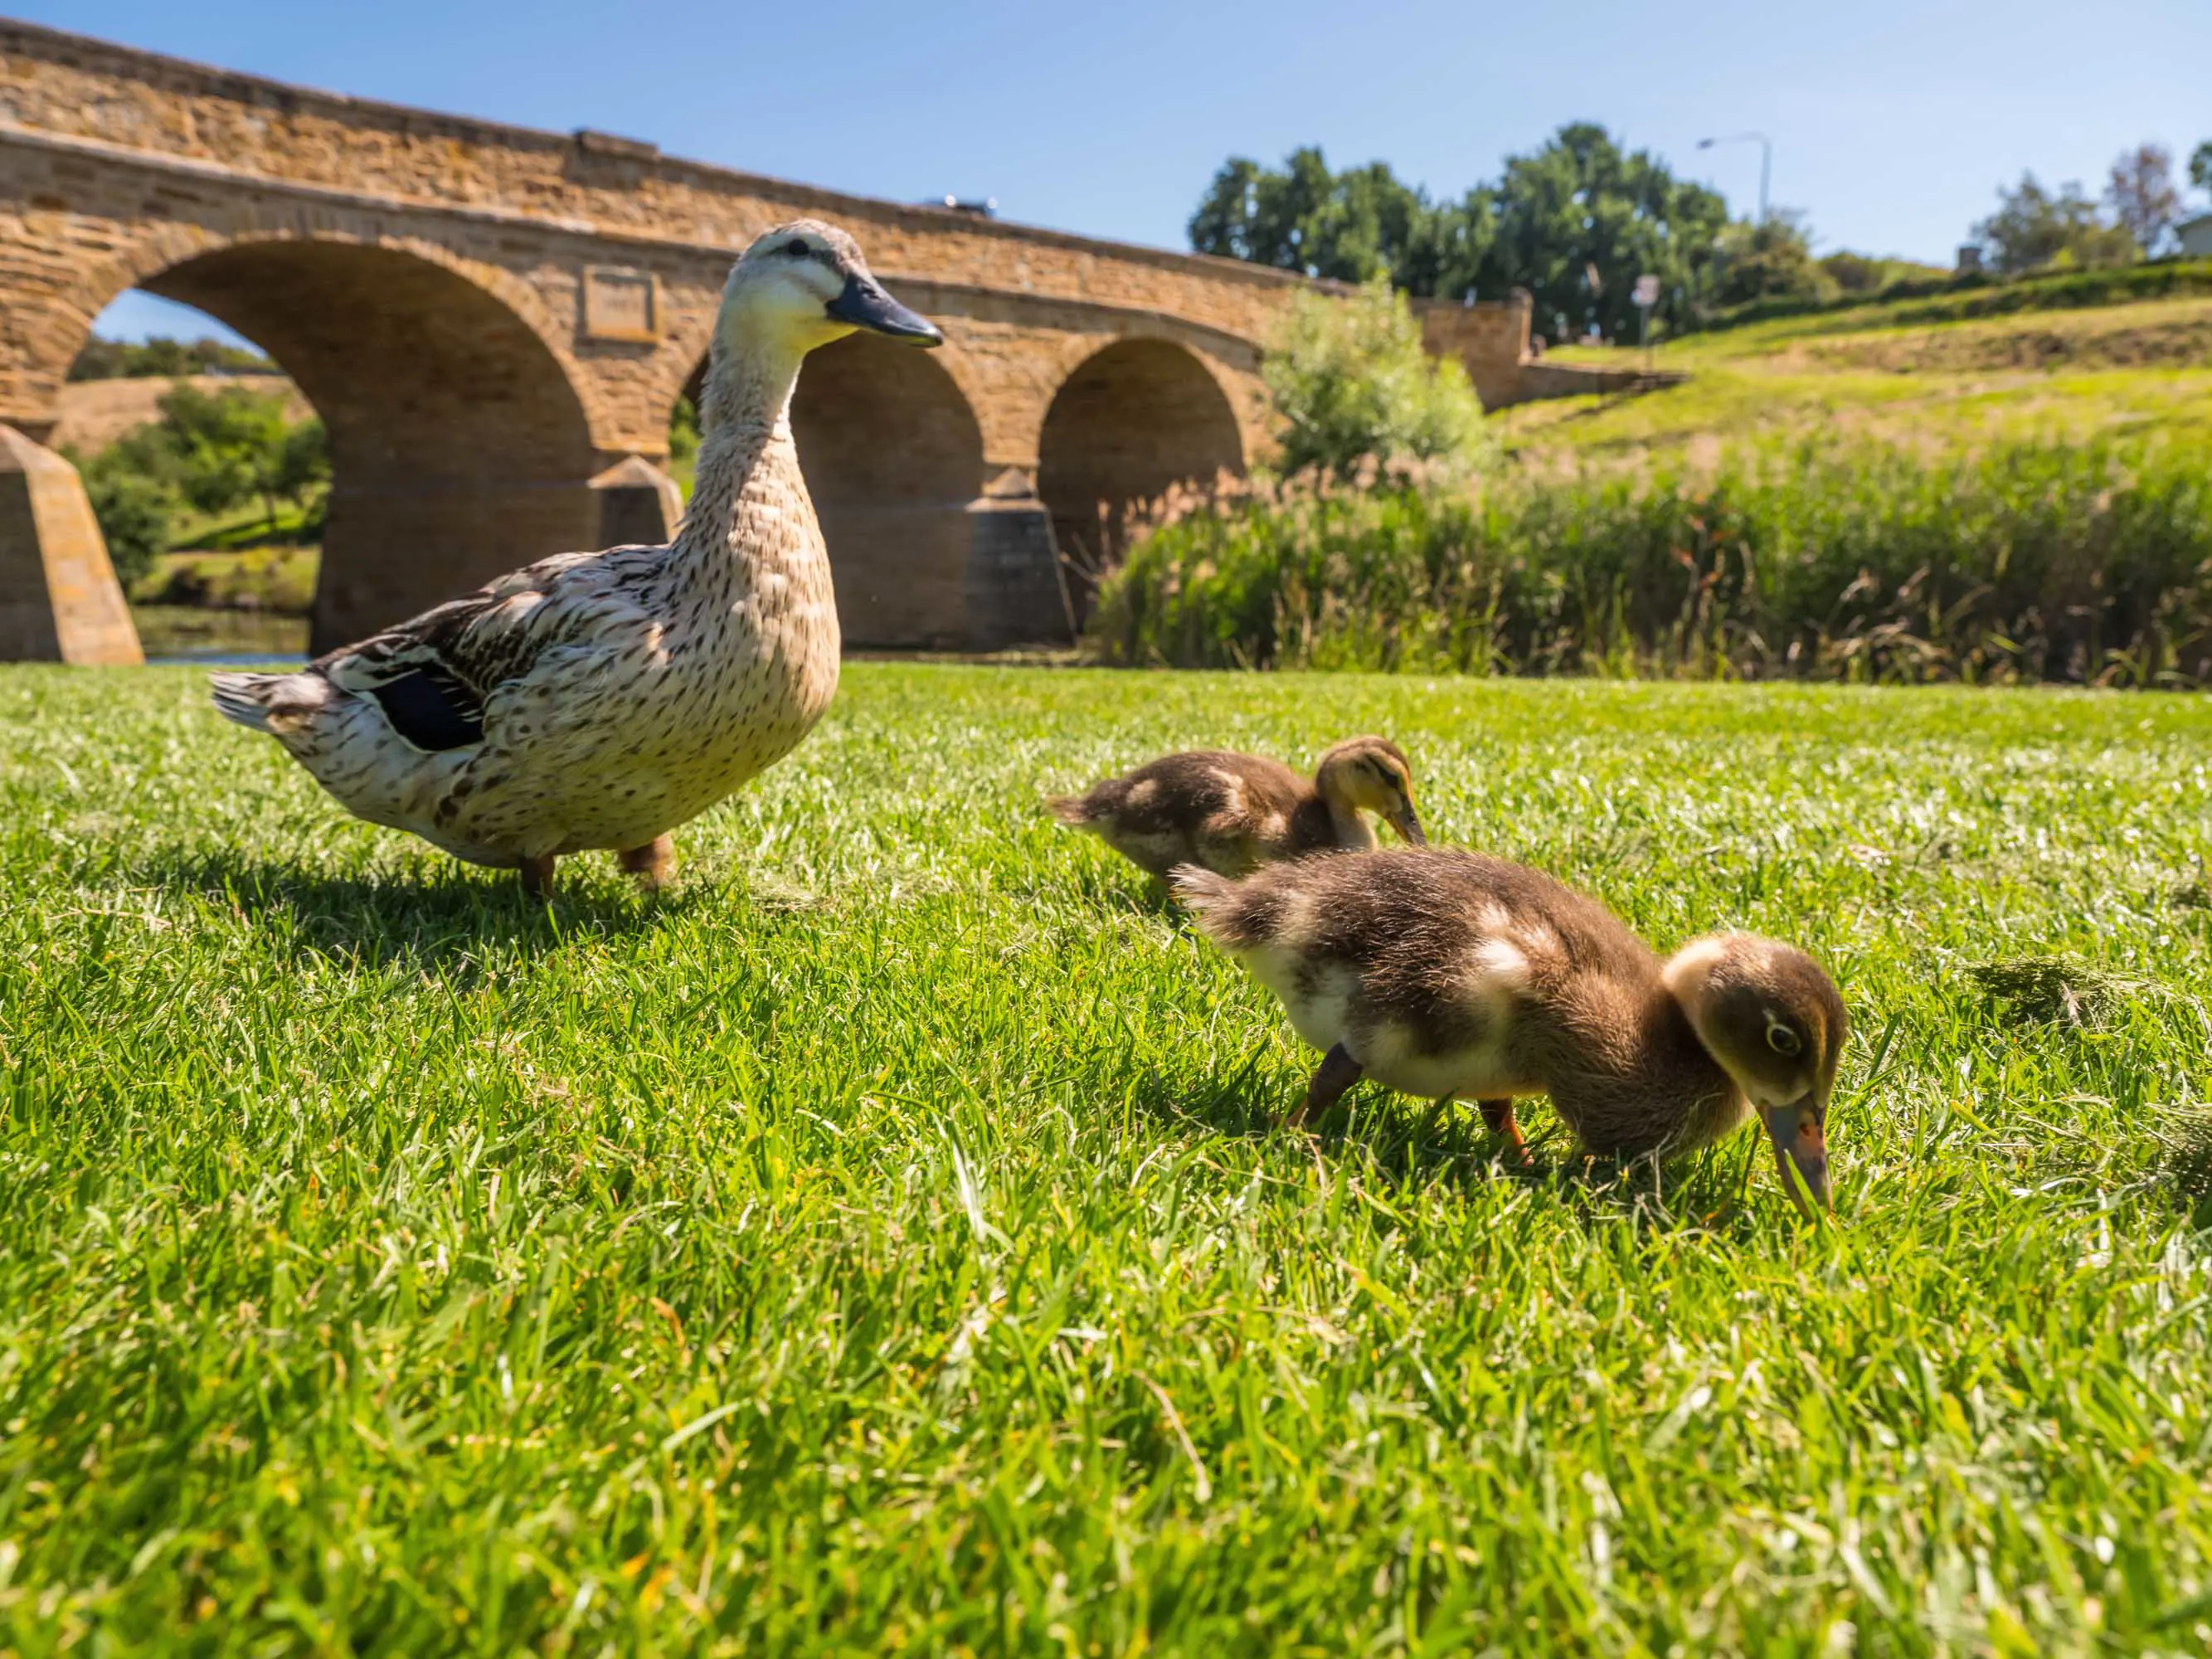 A large brown duck and two ducklings stand on green grass with the arches of a sandstone bridge n the background on a sunny day.